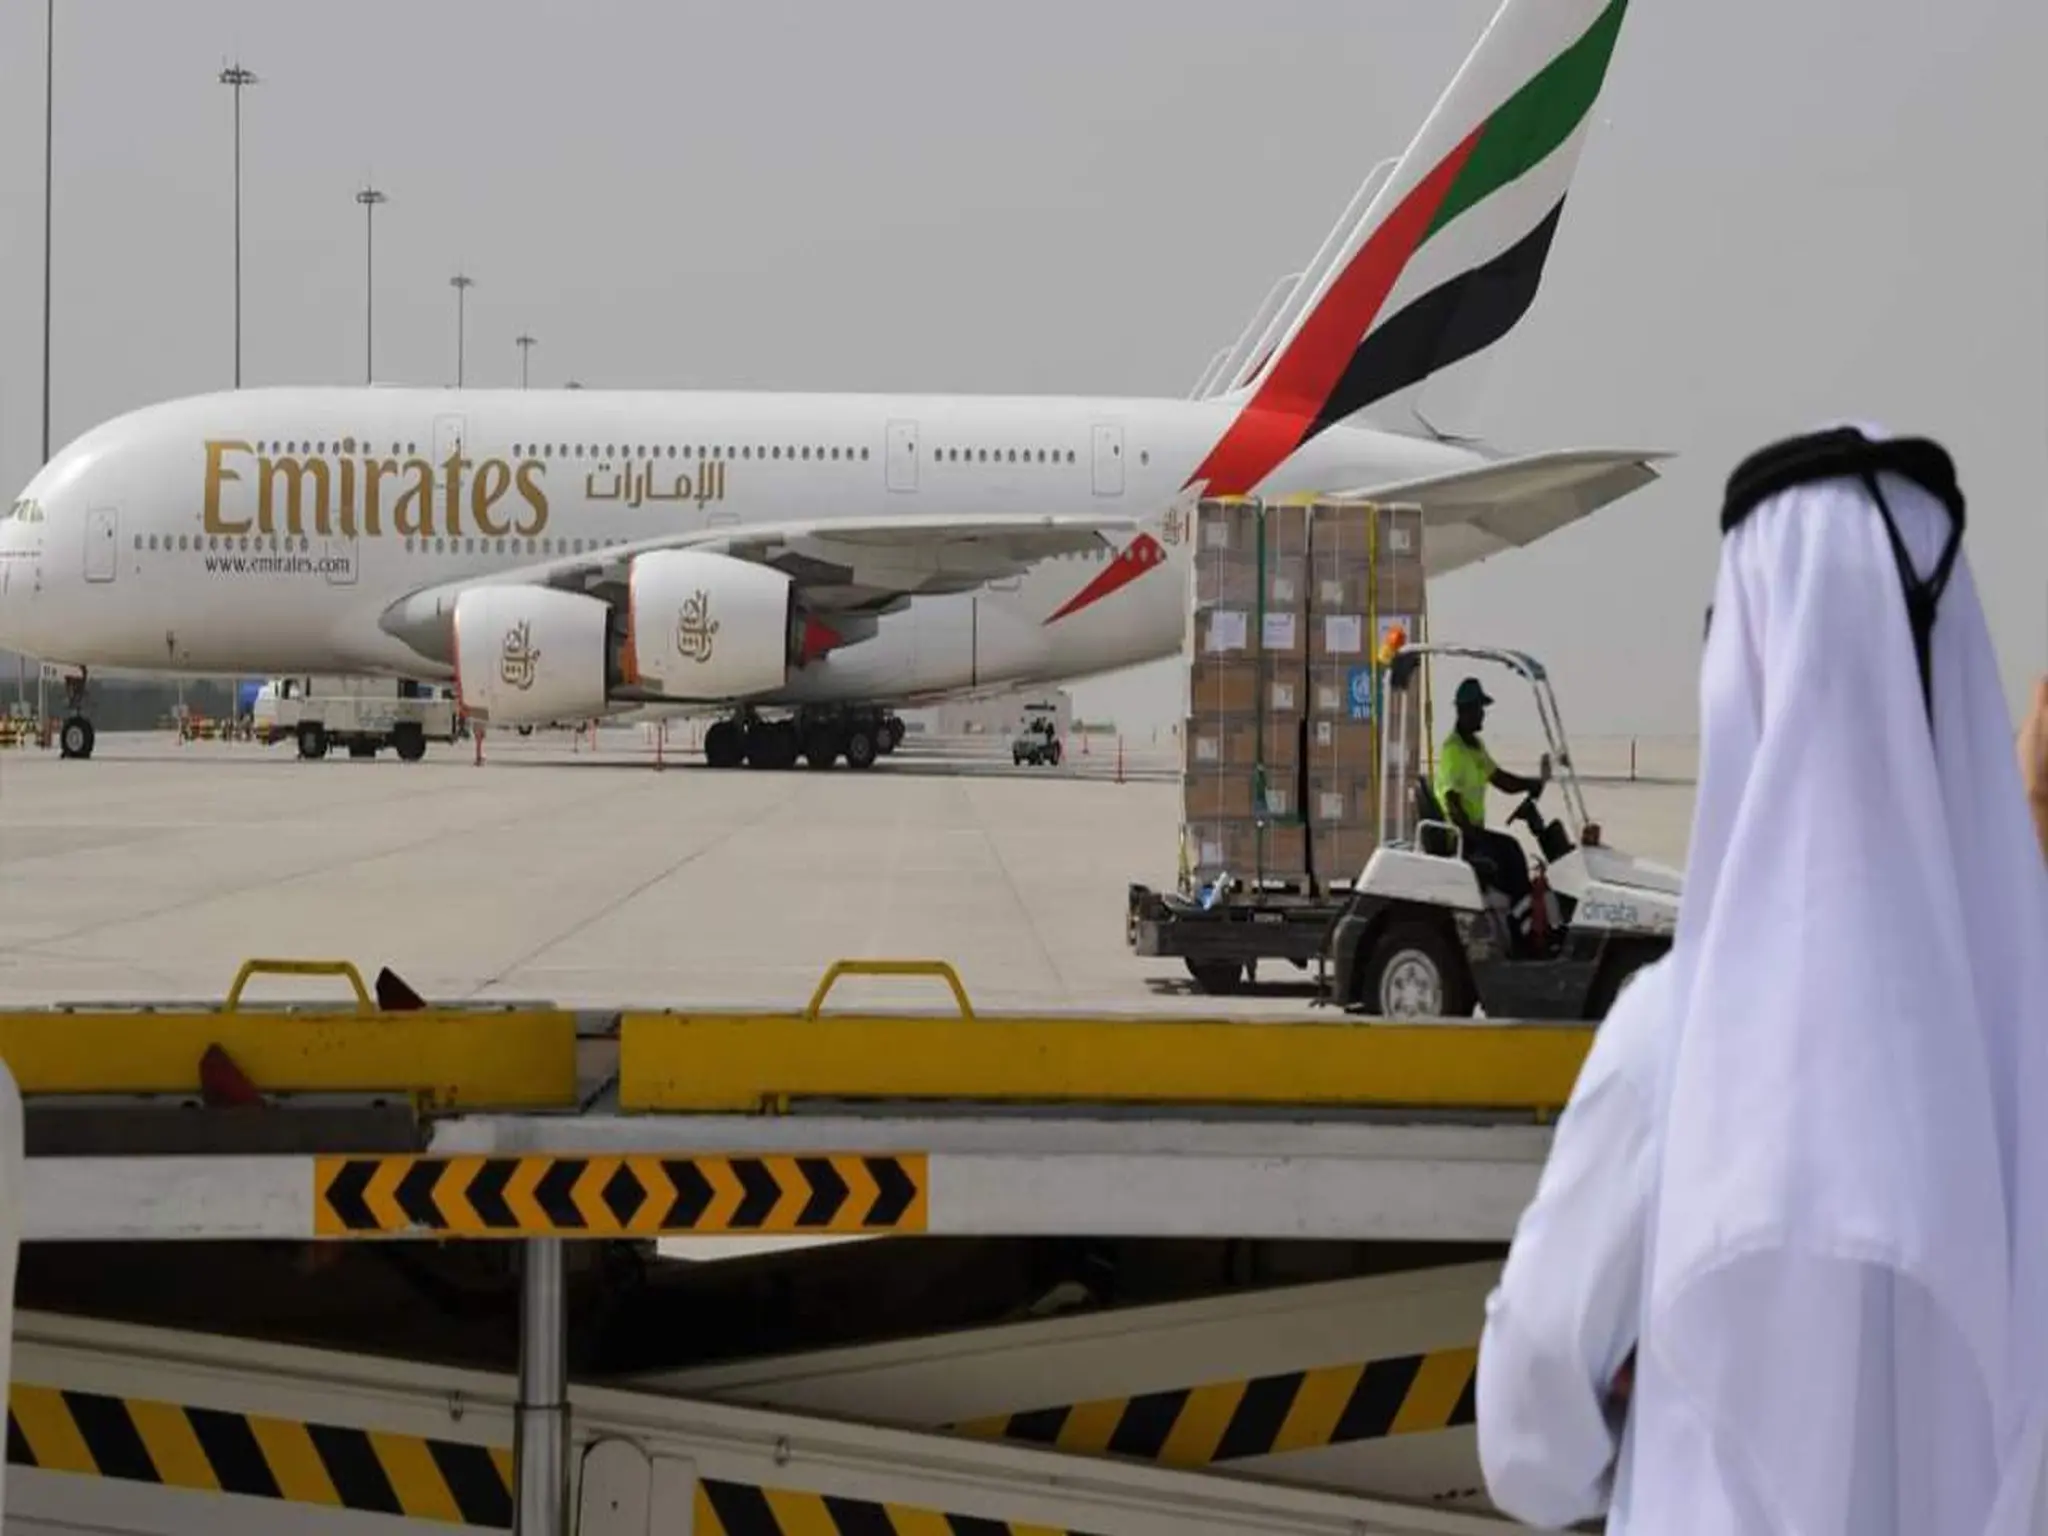 Statement from Emirates Airlines regarding travel bags